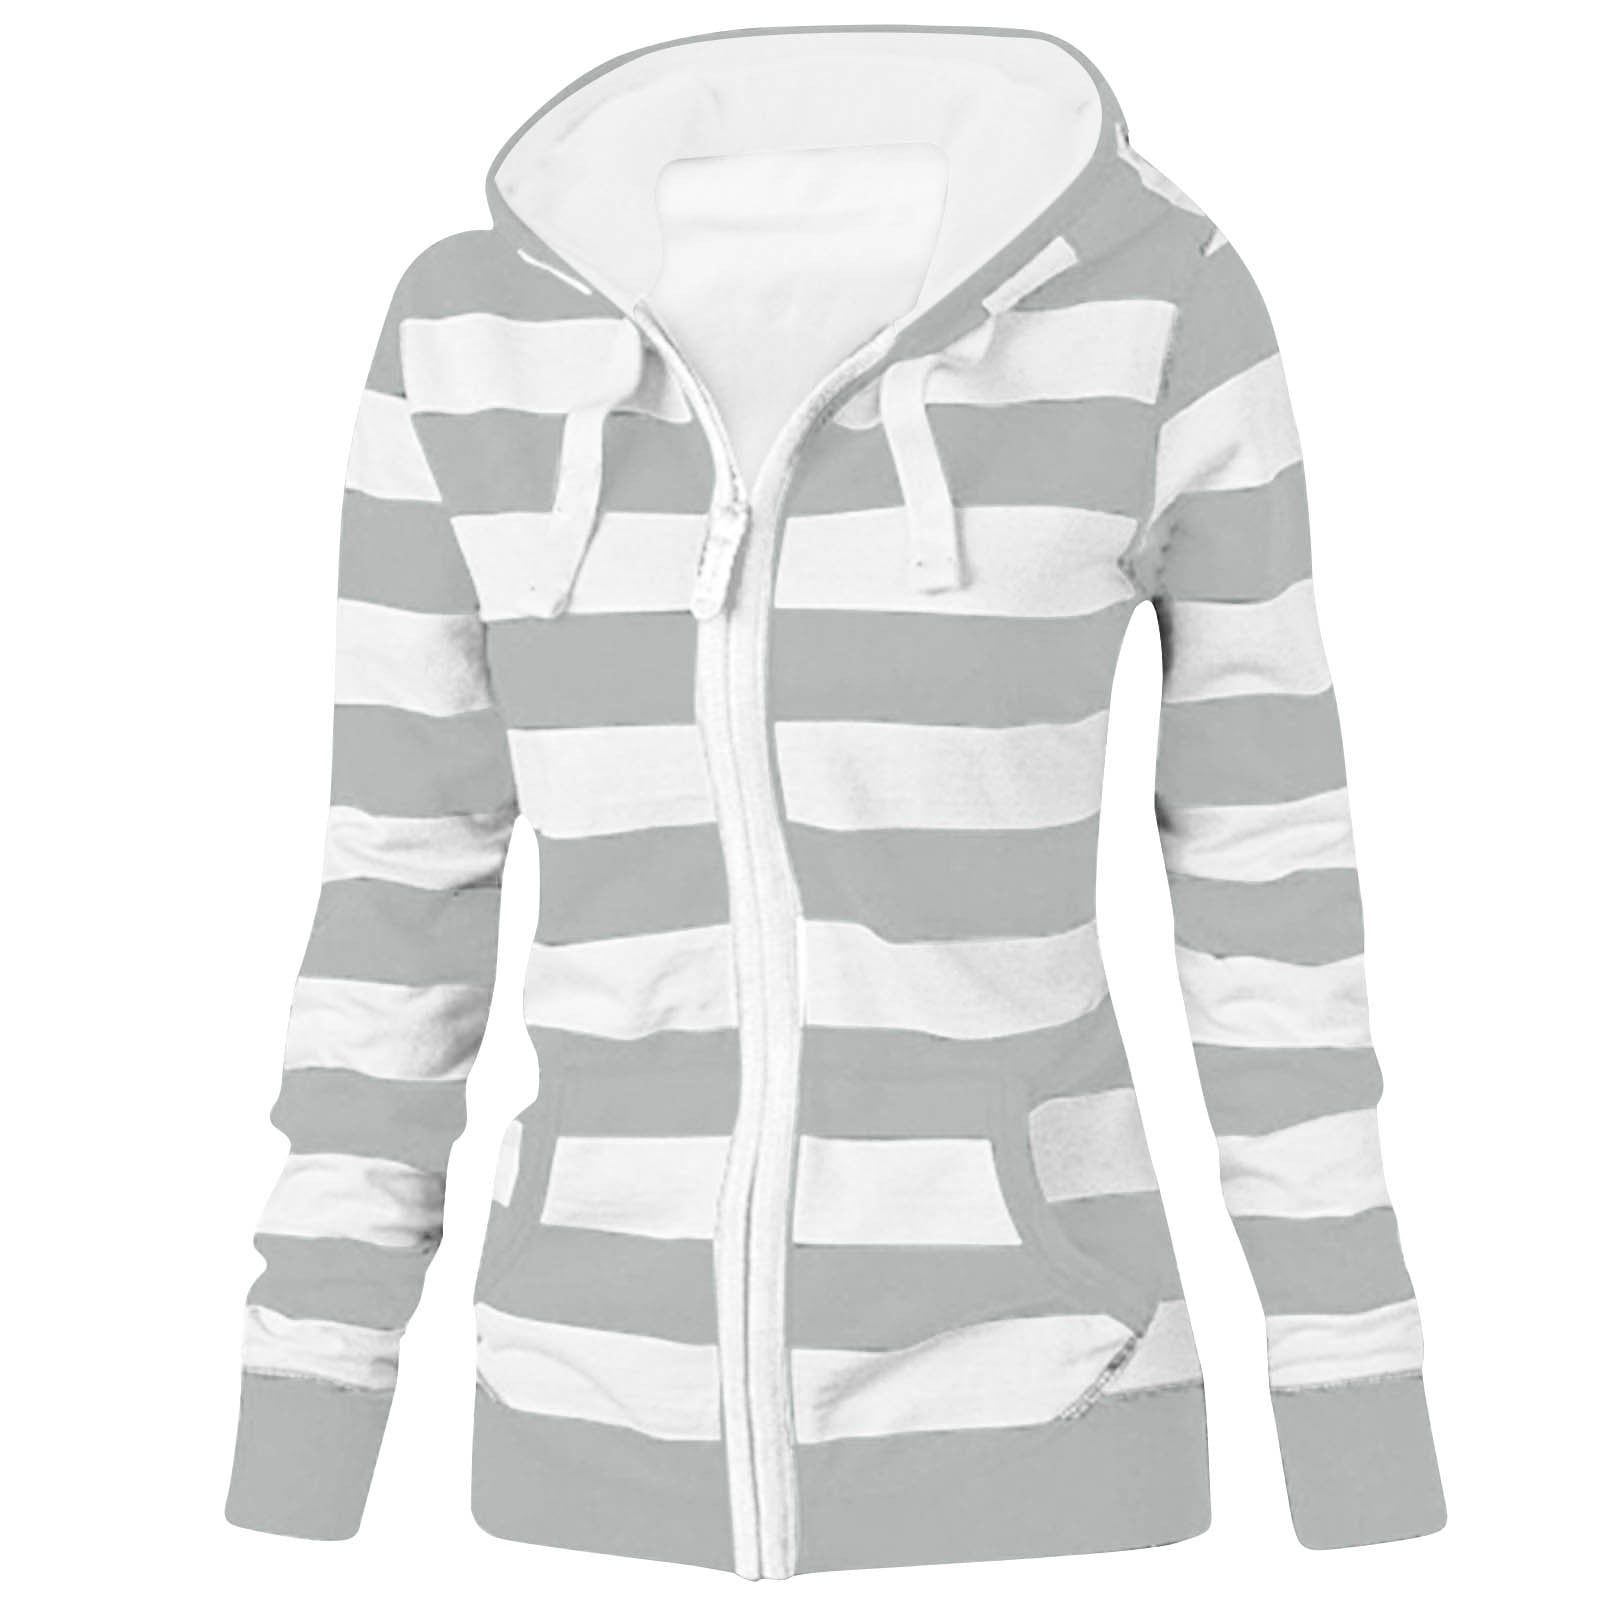 CYMMPU Zip up Jacket Drawstring Fall Sweatshirt Plus Size Tops Long Sleeve  Hoodies with Pockets Striped Patchwork Shirts Trendy Pullover Fashion Plus  Size Tops Light Blue XXL 